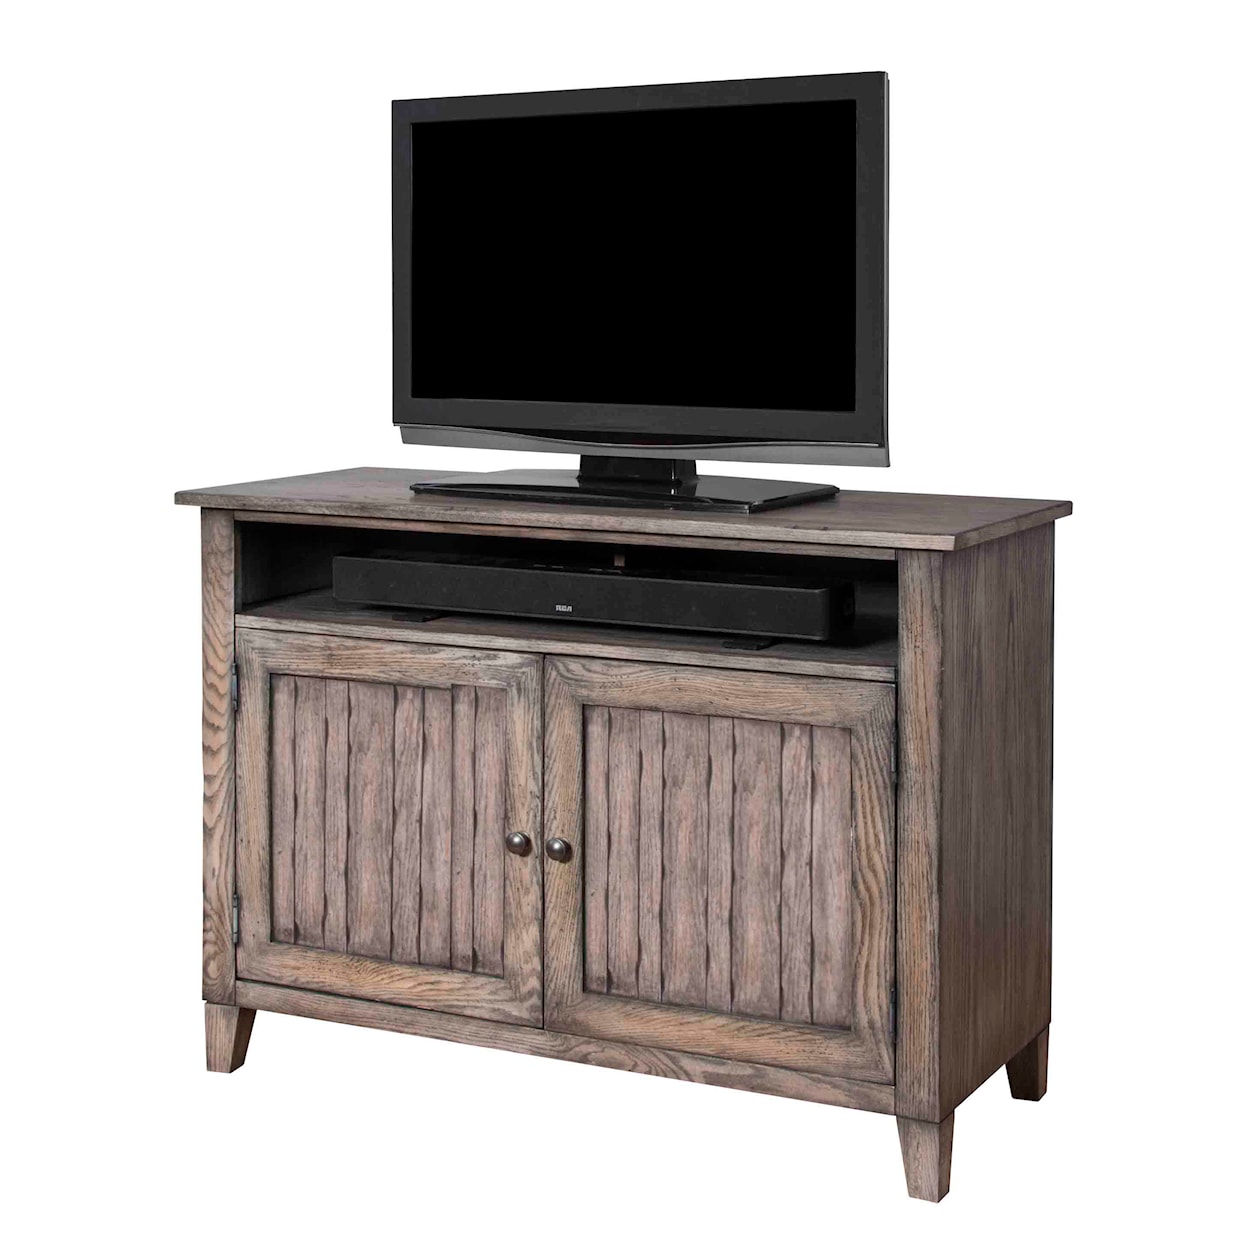 Martin Home Furnishings Eclectic Home Entertainment & Storage 40" TV Console